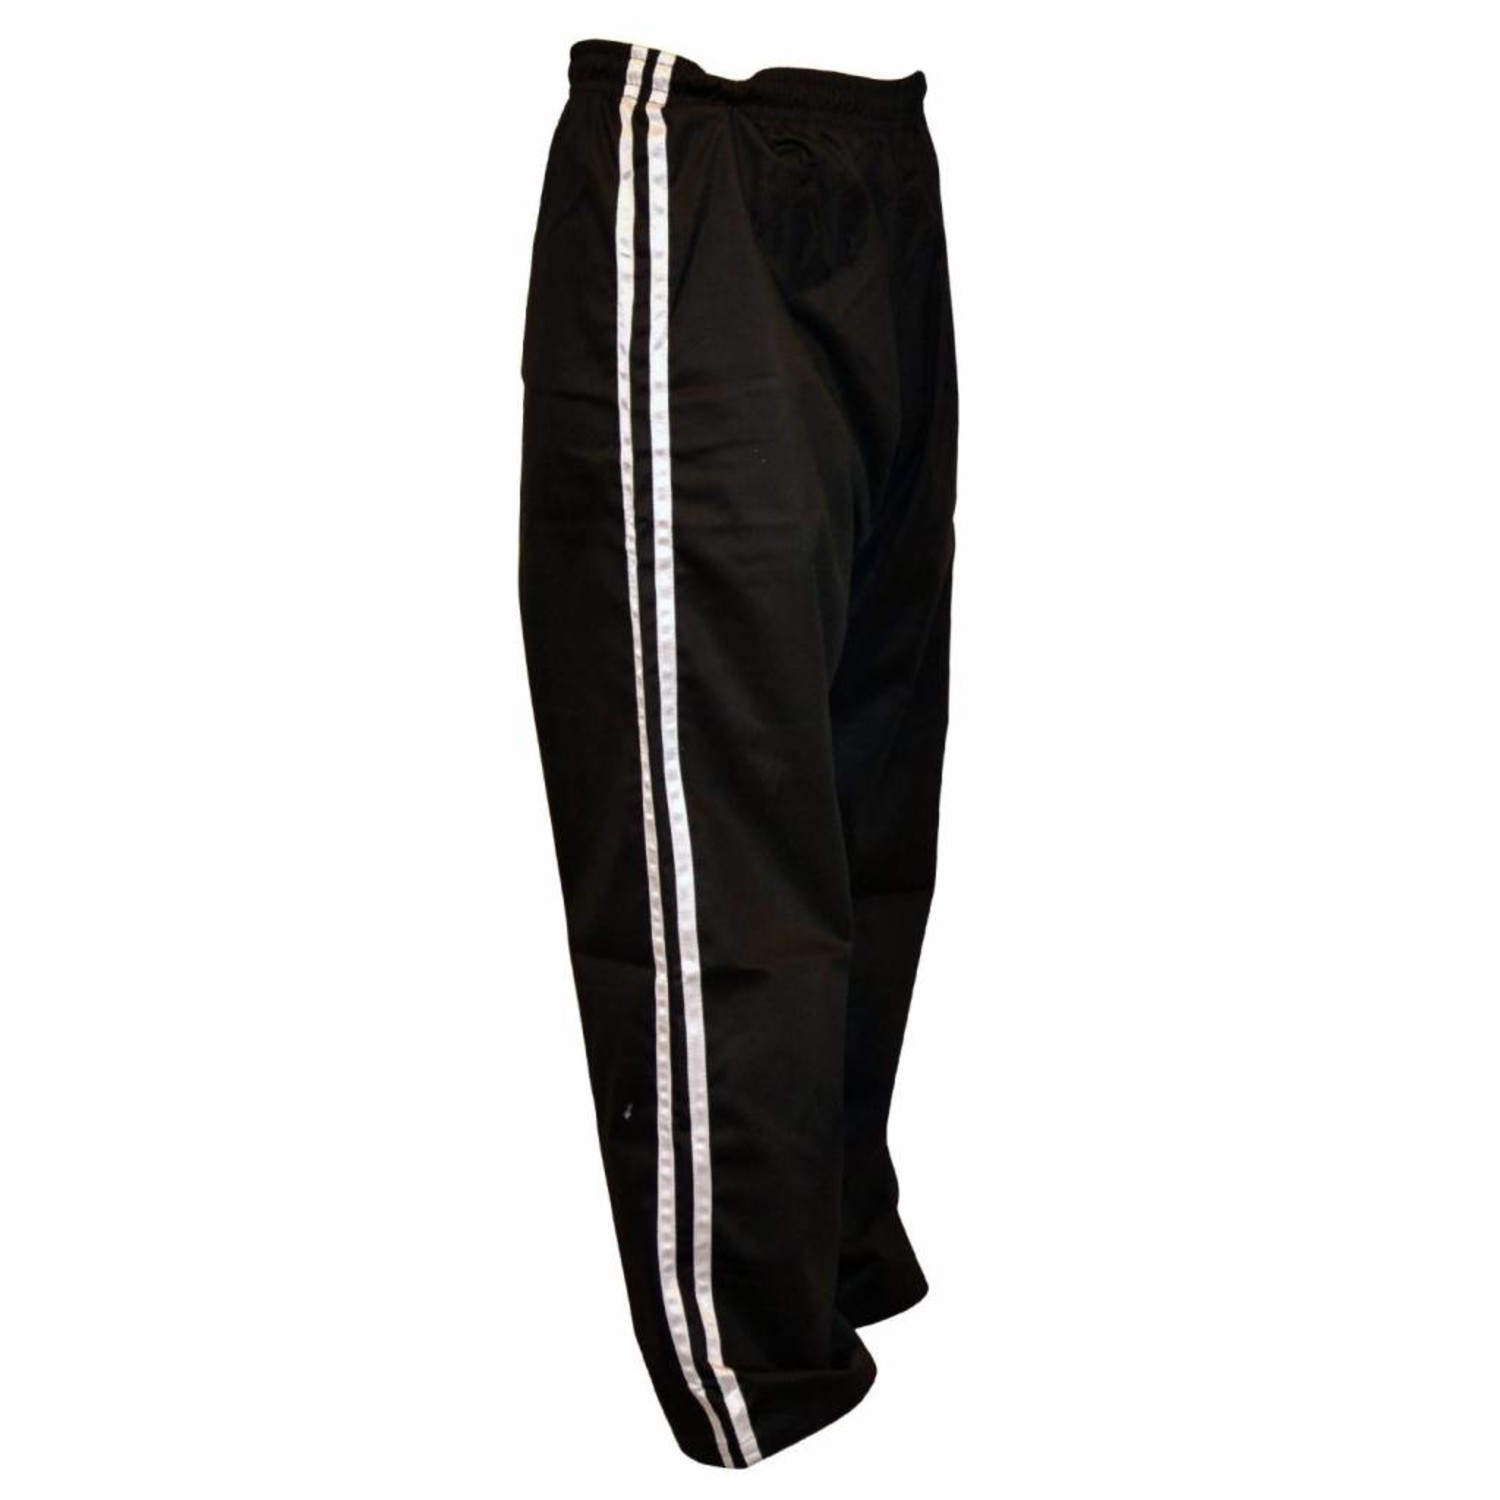 Cimac Kickboxing Pants Poly Cotton Trousers Black Red Martial Arts Adult  Mens | eBay